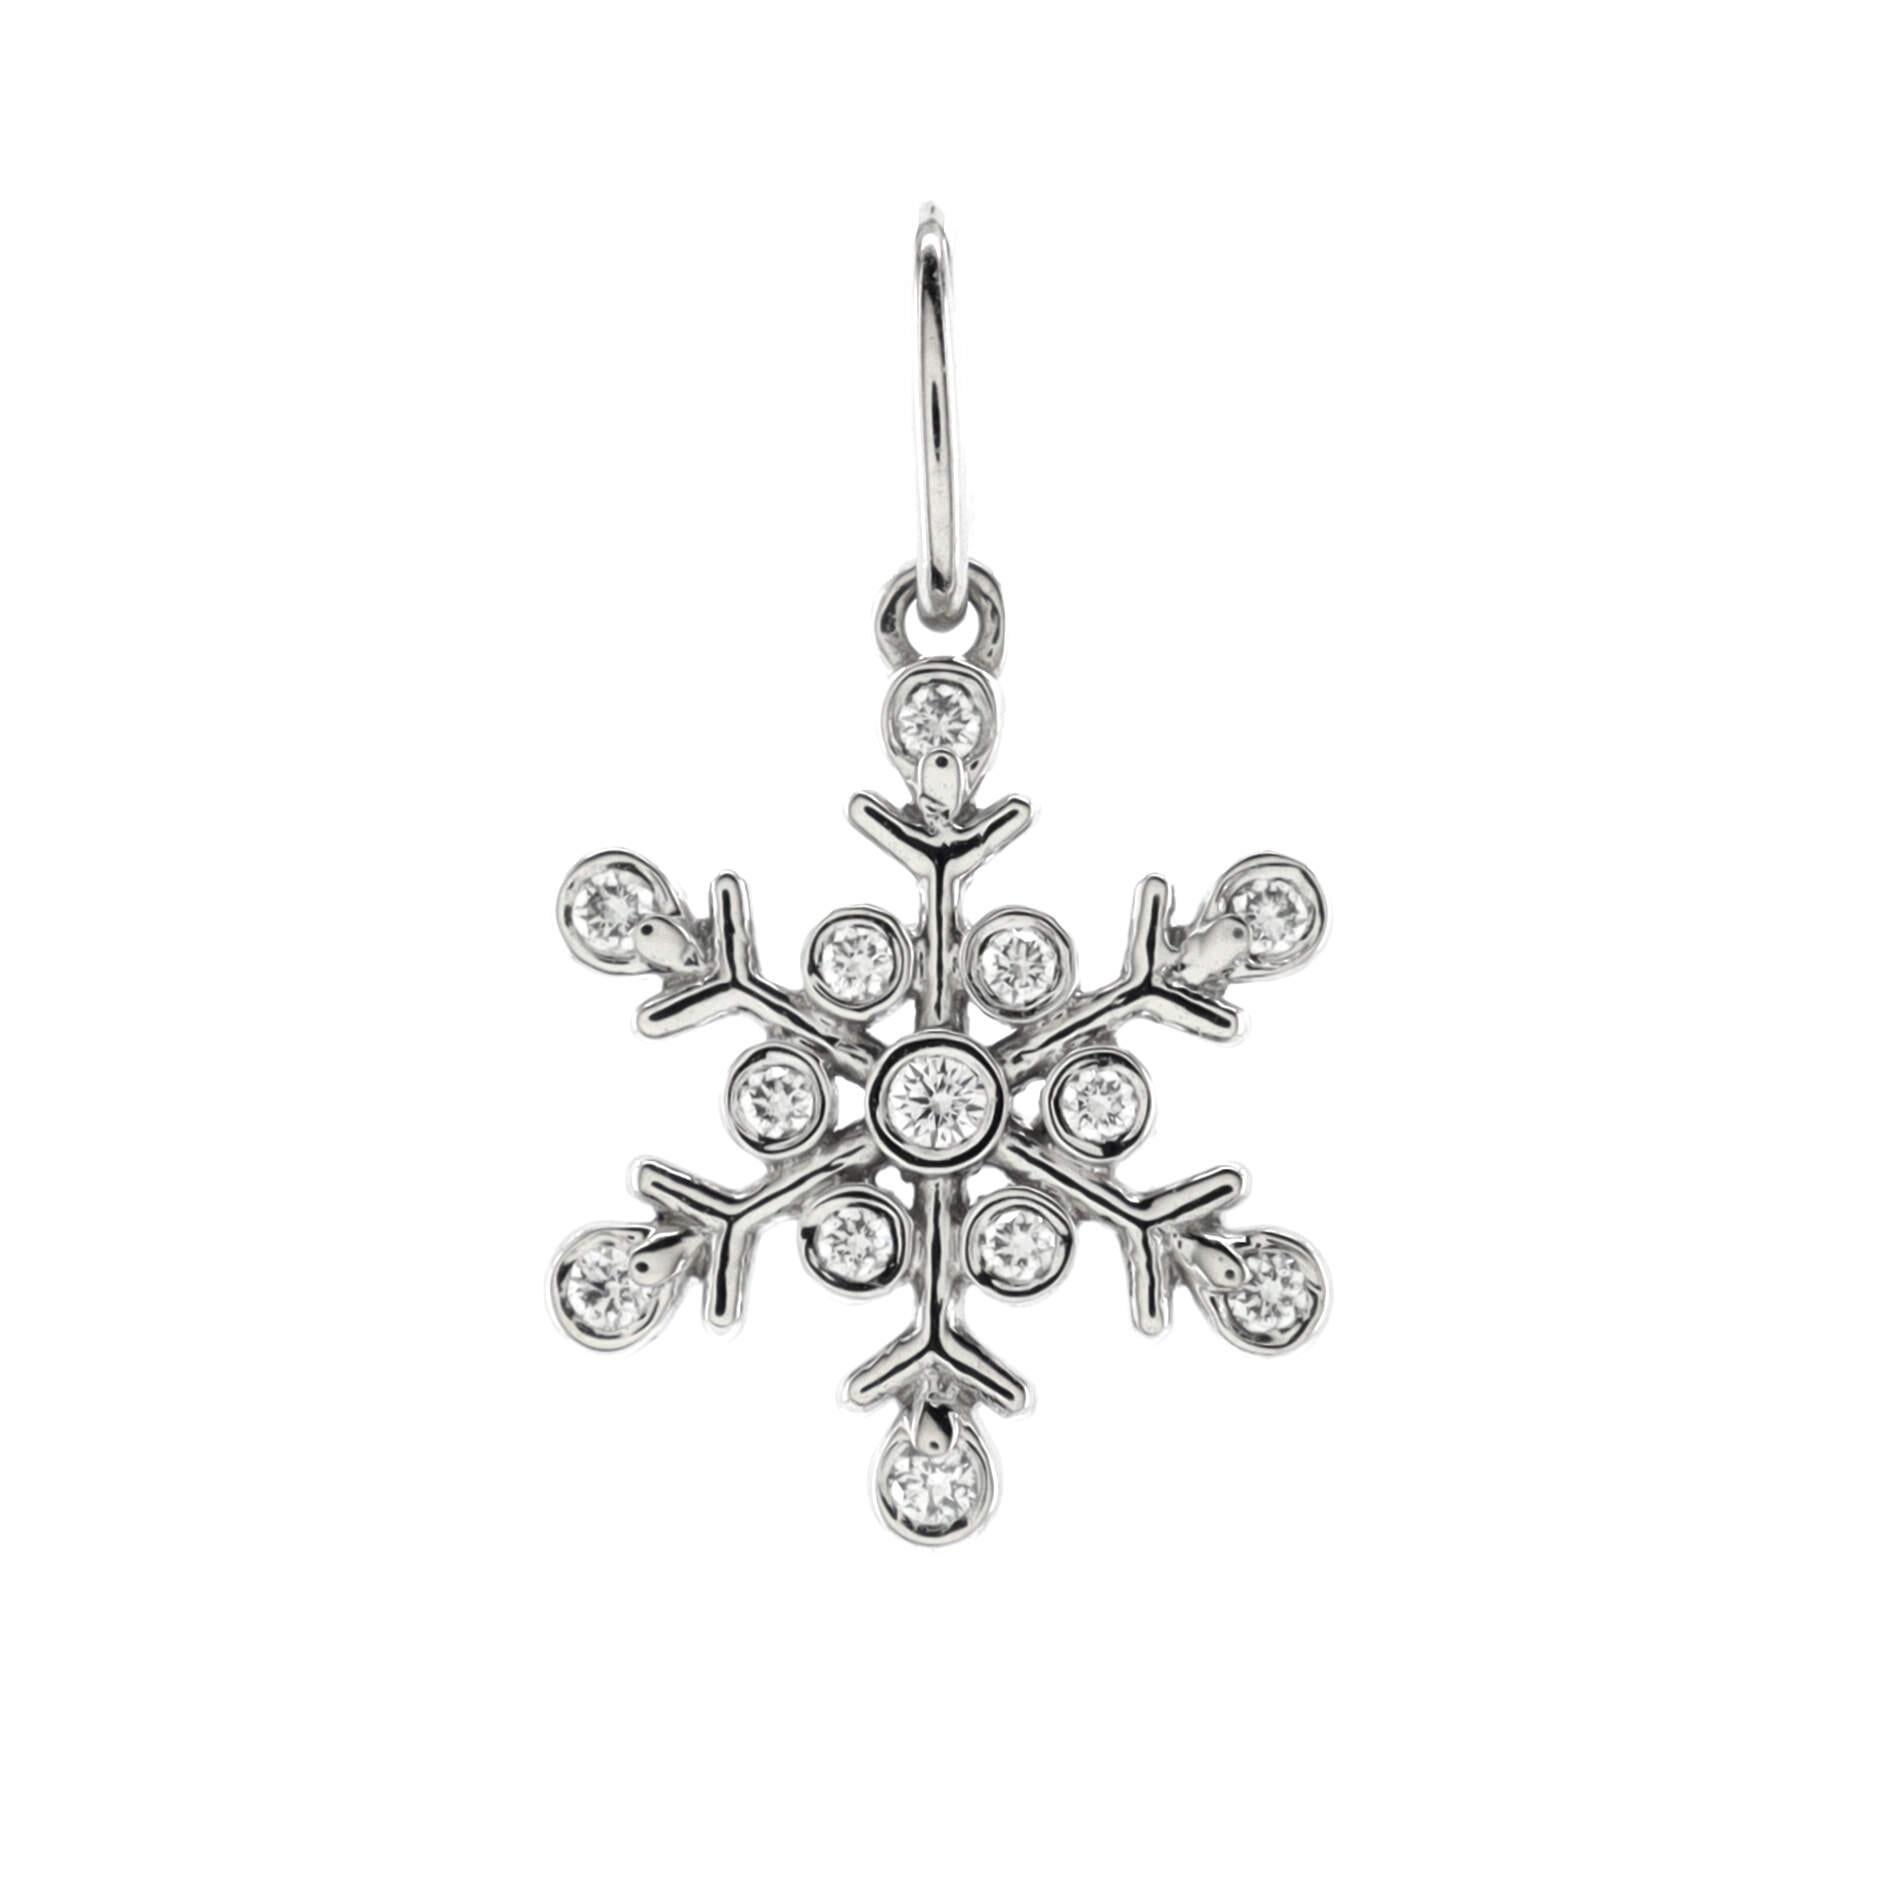 Condition: Excellent. Faint wear throughout.
Accessories: No Accessories
Measurements: Height/Length: 16.35 mm, Width: 9.60 mm
Designer: Tiffany & Co.
Model: Snowflake Pendant Pendant & Charms Platinum with Diamonds
Exterior Color: Silver
Item